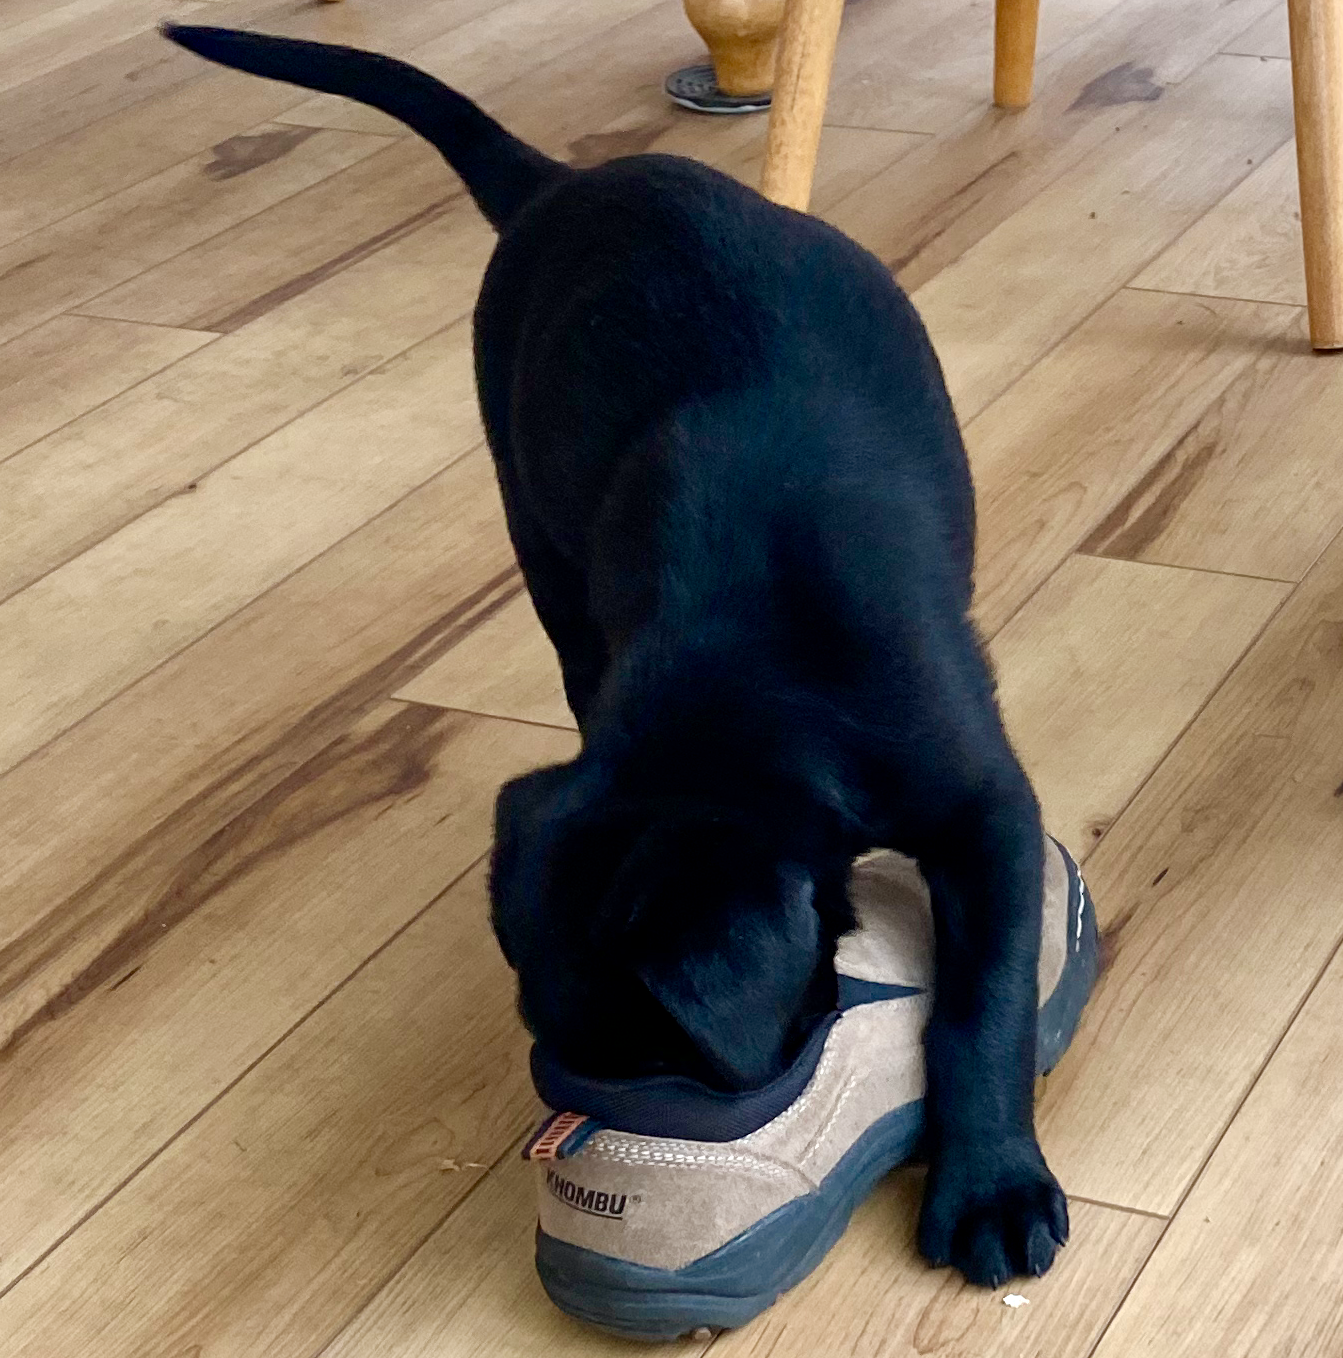 Image of Gus with a shoe